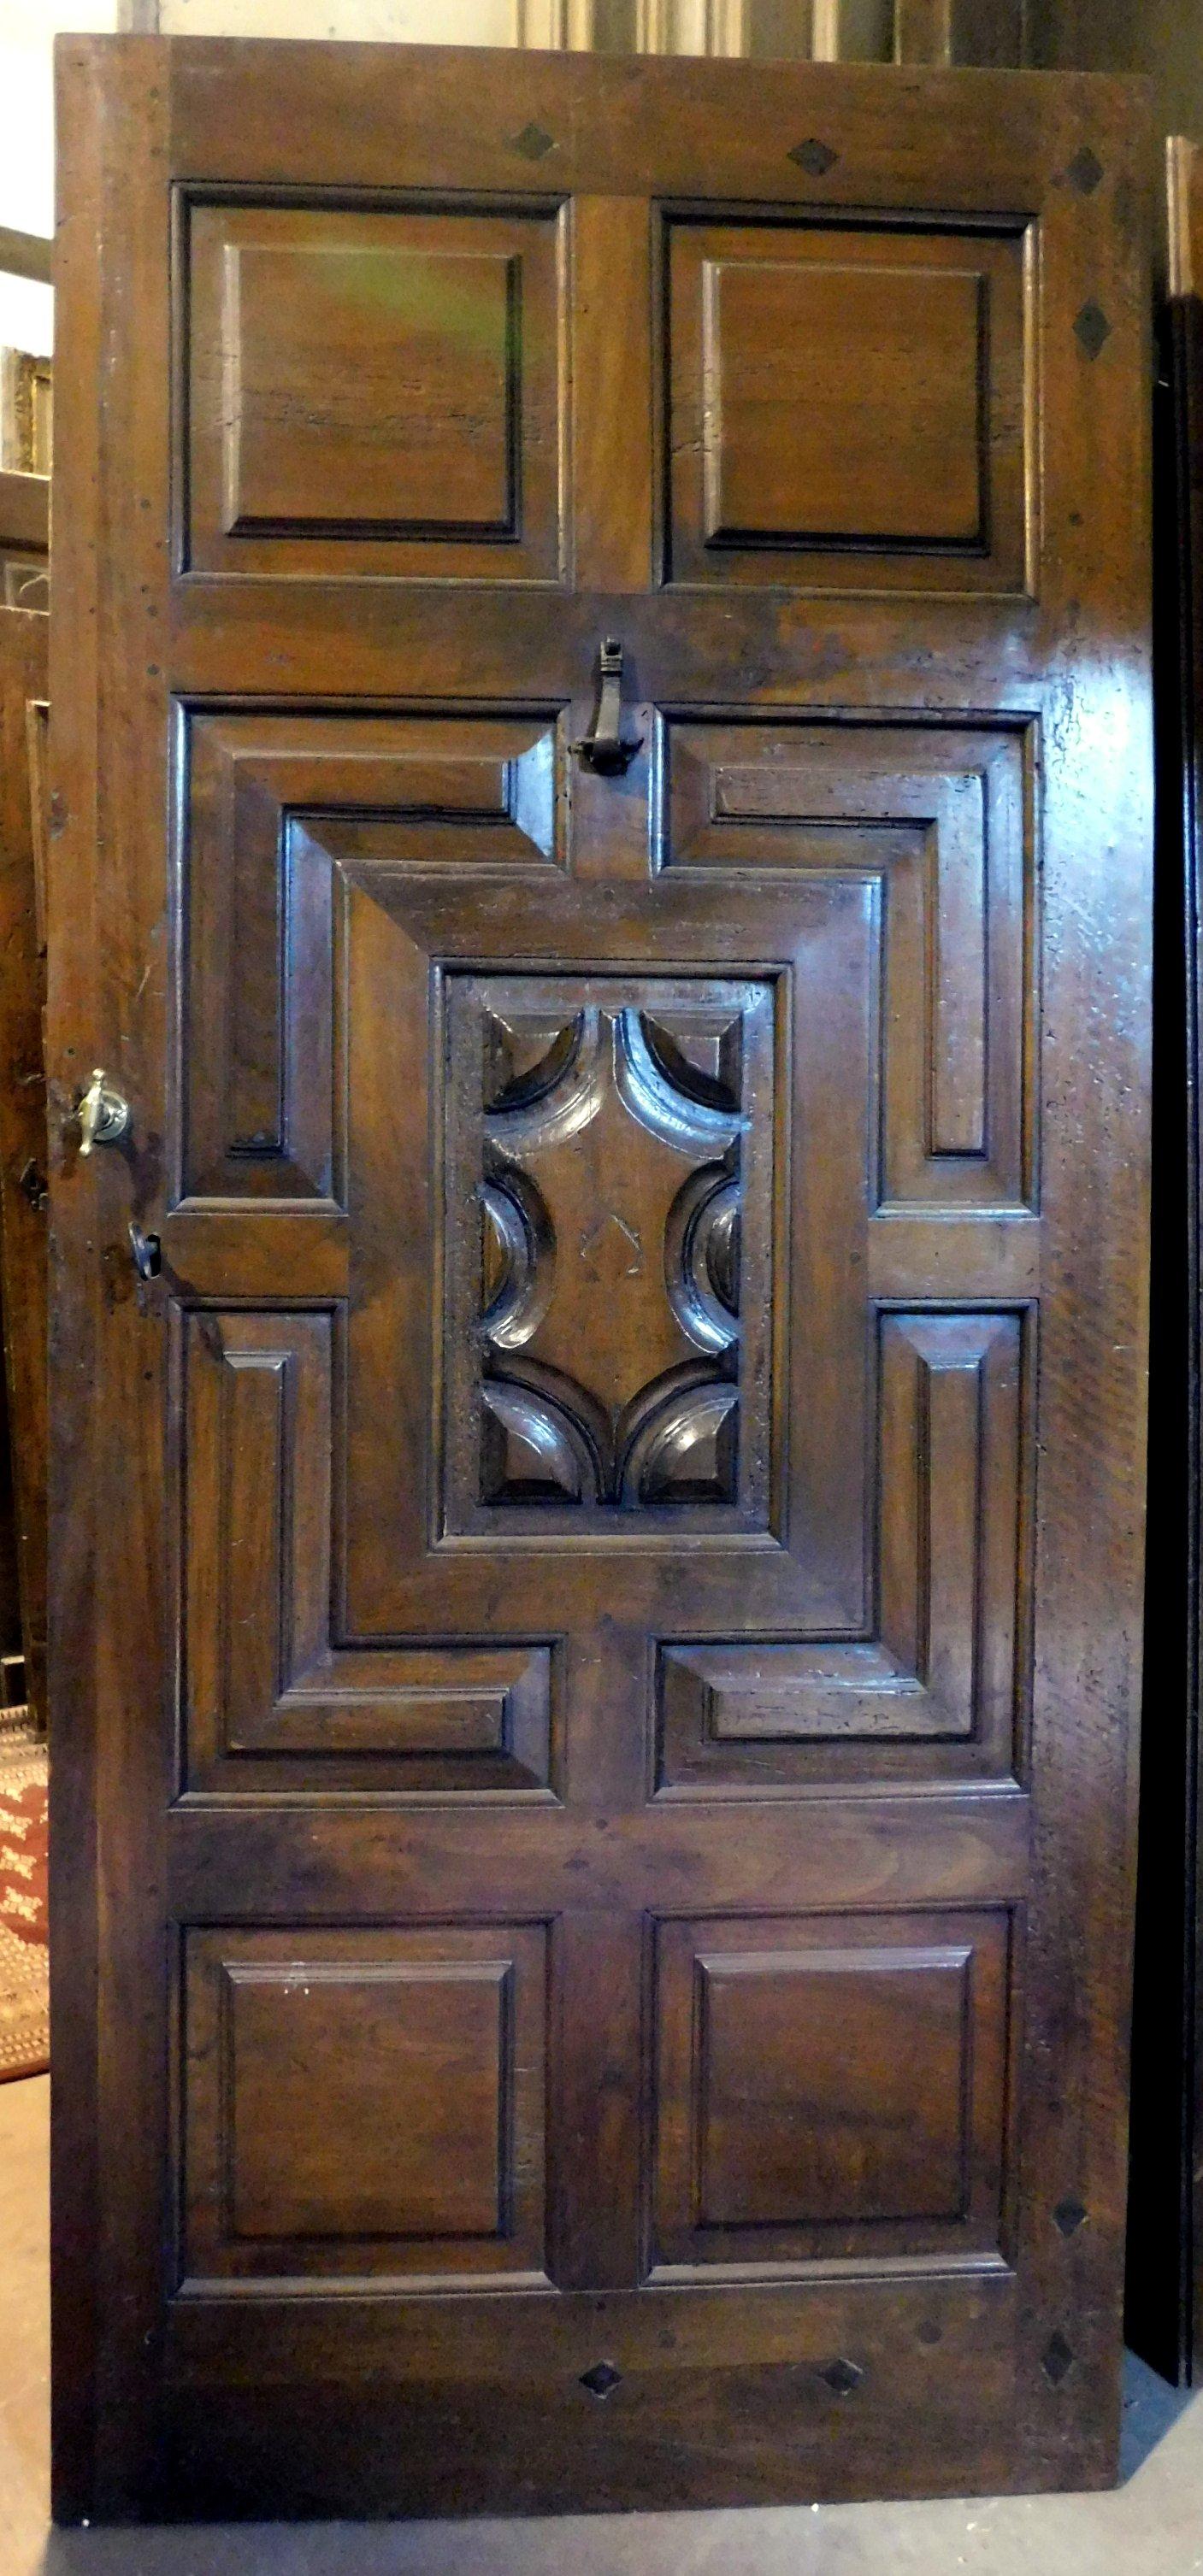 Ancient entrance door, main door, built by hand in precious walnut wood carved by hand with tiles of the time, from the beginning of the 18th century, built for the entrance of a villa in the historic center in northern Italy, from Saluzzo